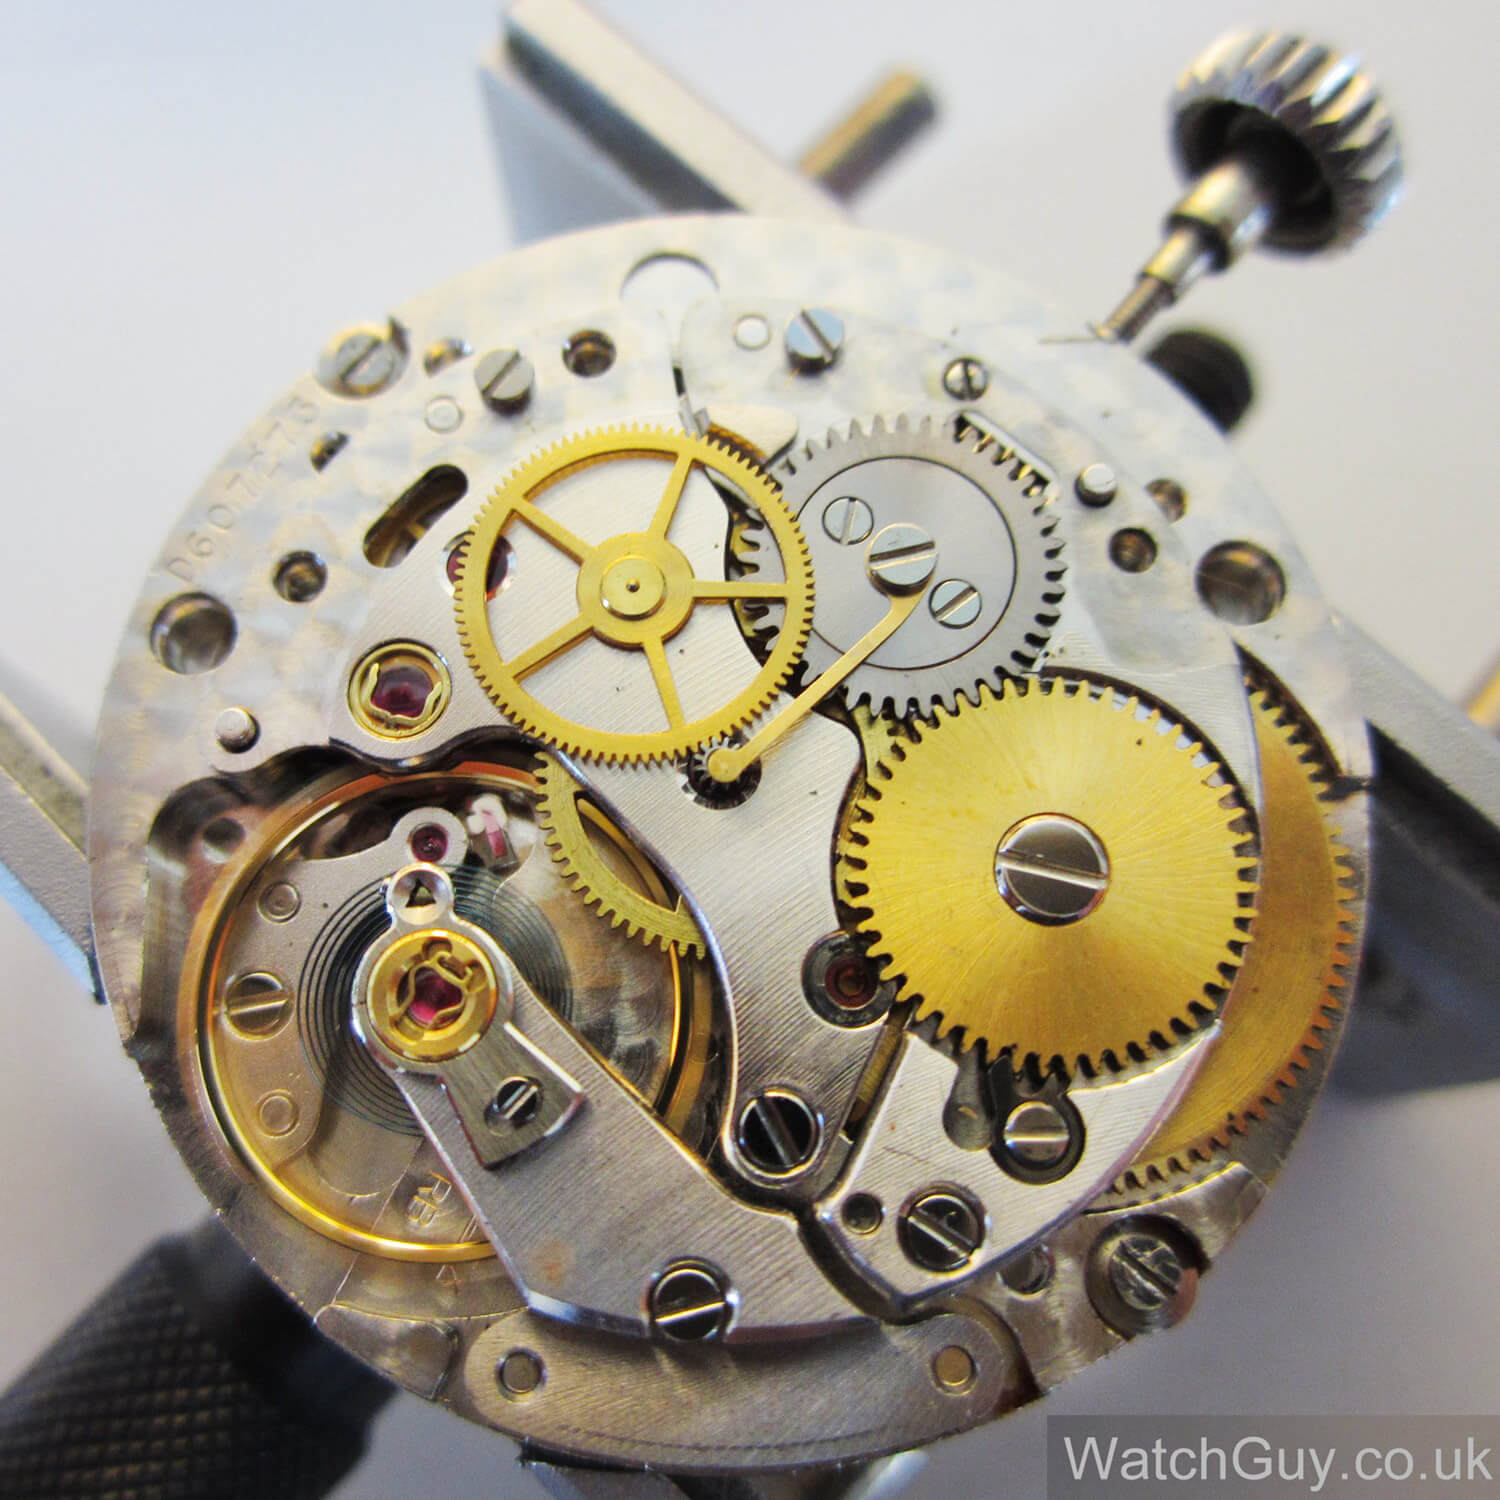 Rolex Caliber 1570 with automatic winding mechanism removed